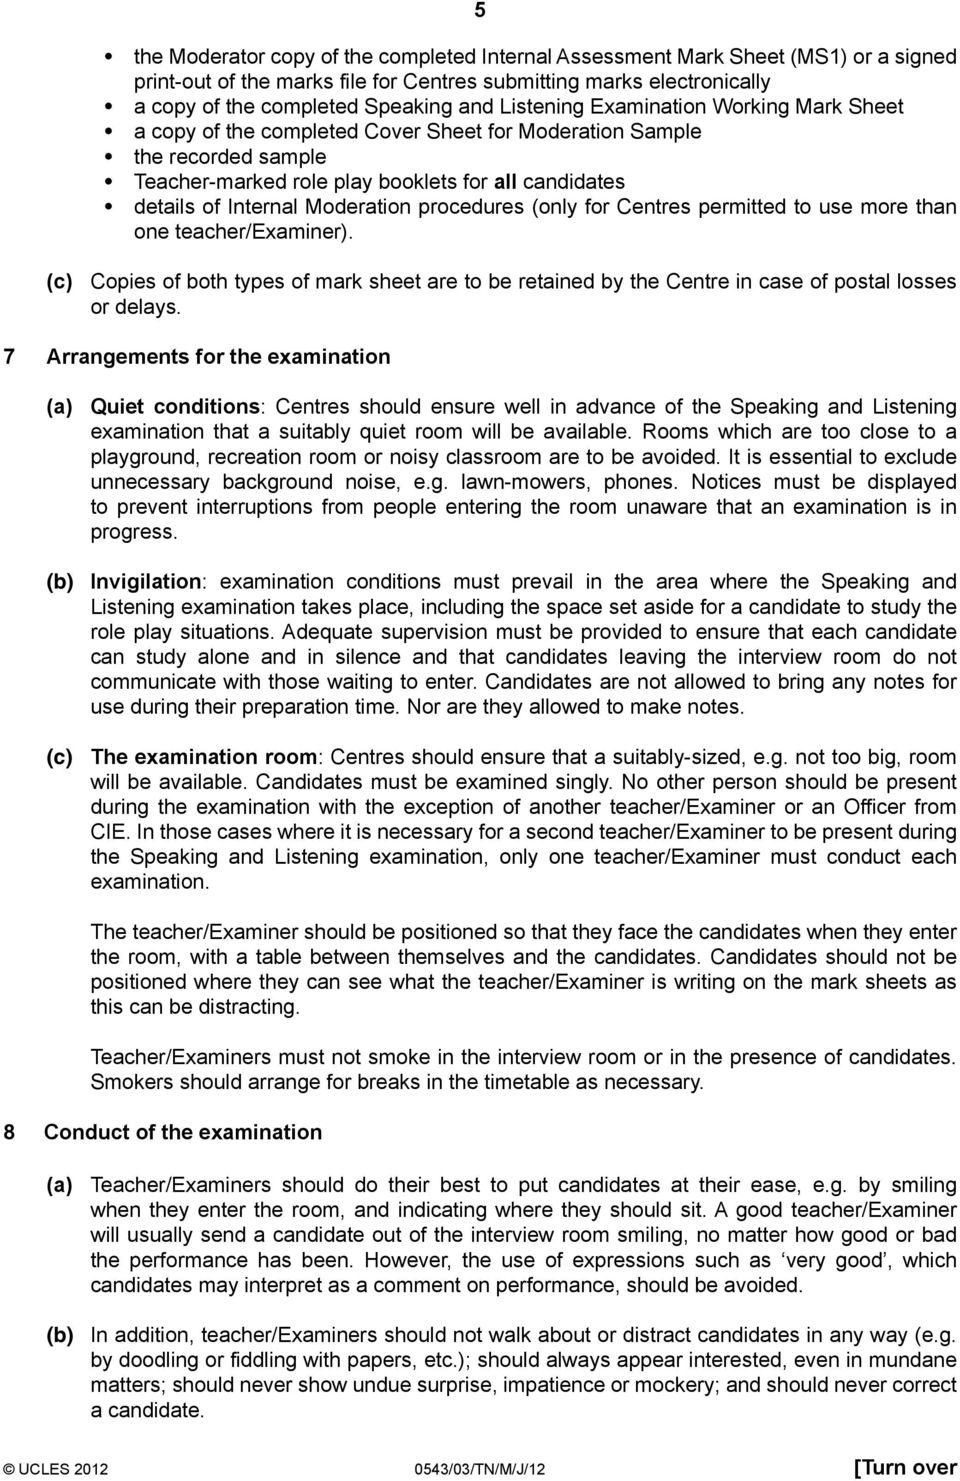 Moderation procedures (only for Centres permitted to use more than one teacher/examiner). (c) Copies of both types of mark sheet are to be retained by the Centre in case of postal losses or delays.